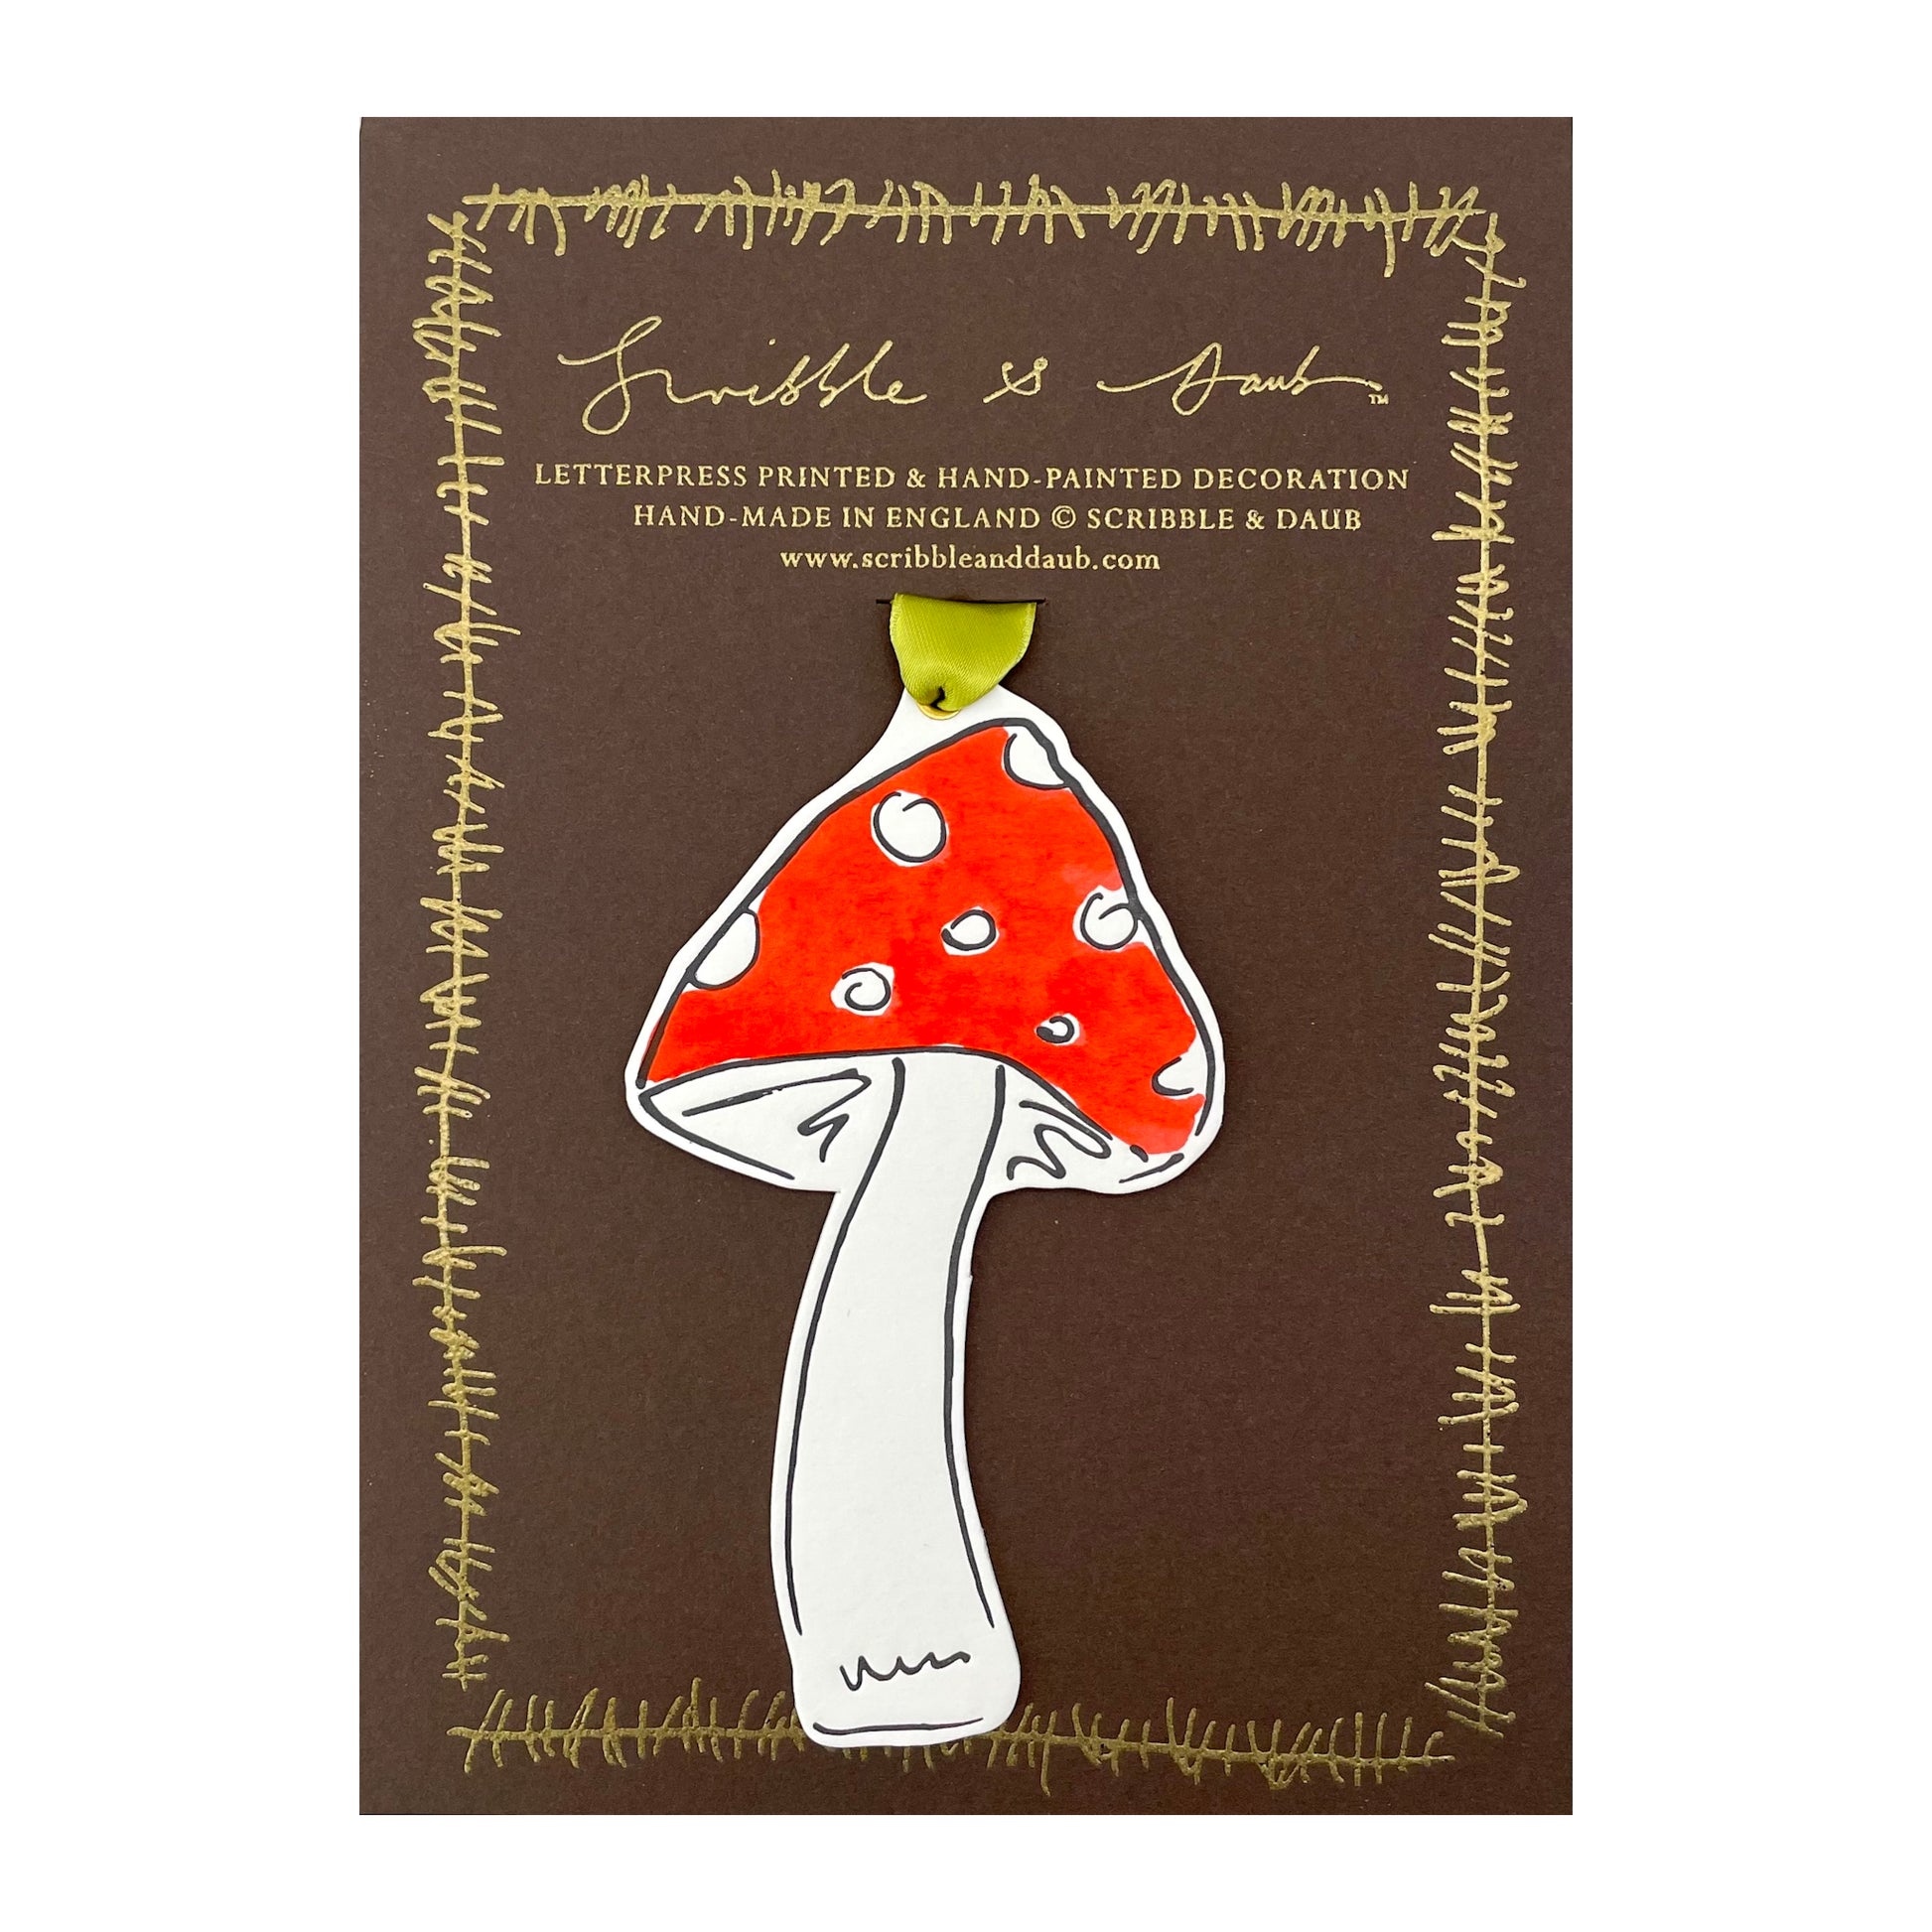 a mushroom shaped hanging ornament made of thick 1050gsm off-white card, letterpress printed in black and then hand painted in red ink. It has a chartreuse green satin ribbon to hang the ornament with. By Scribble & Daub. Pictured on a gold-foiled brown board.